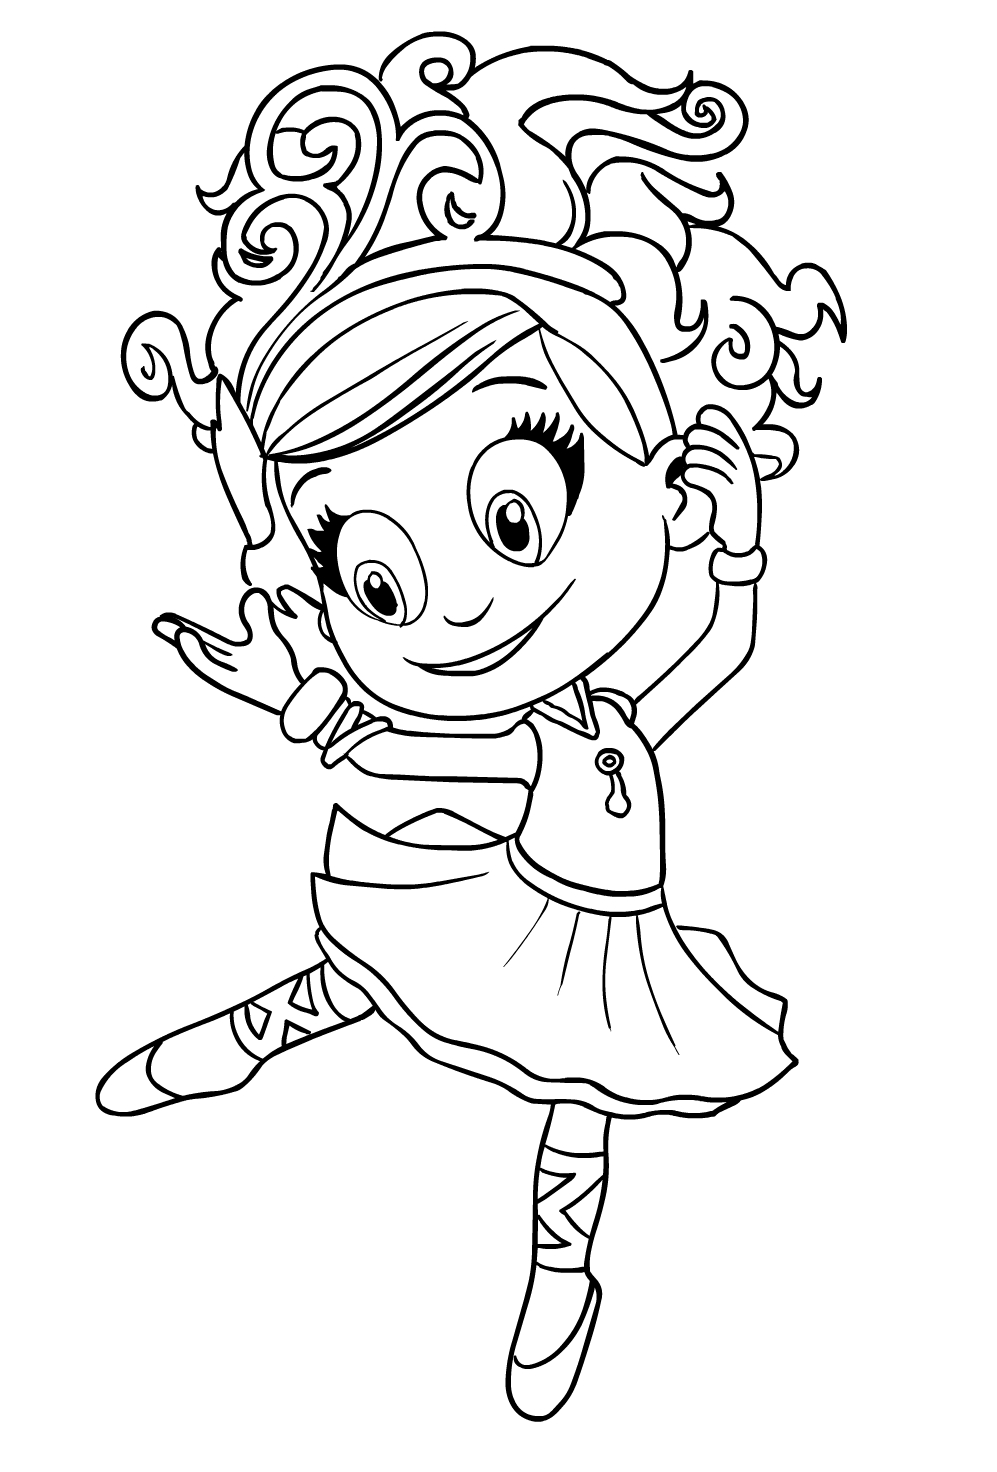 Luna Petunia 3 coloring page to print and color